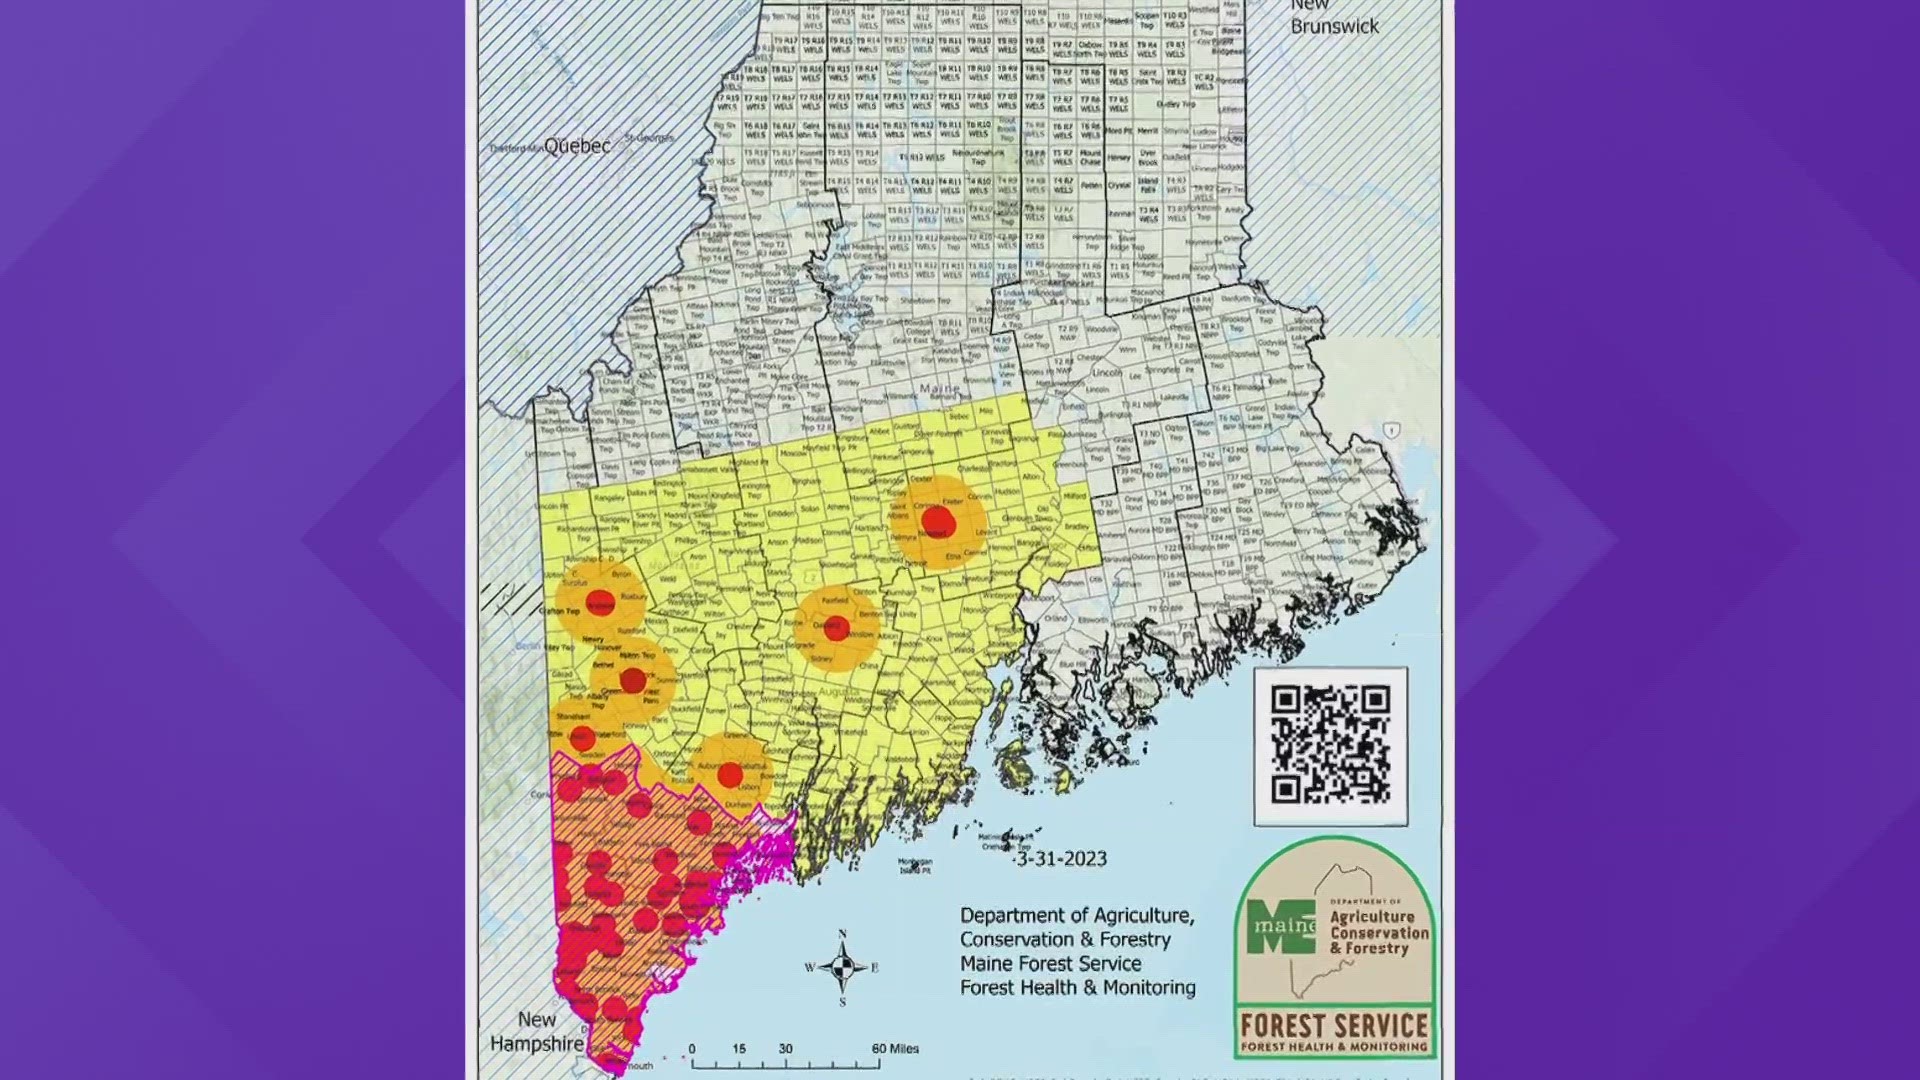 The Maine Forest Service expanded its emergency order restricting the movement of ash trees and products after finding infestations in Penobscot and Oxford Counties.